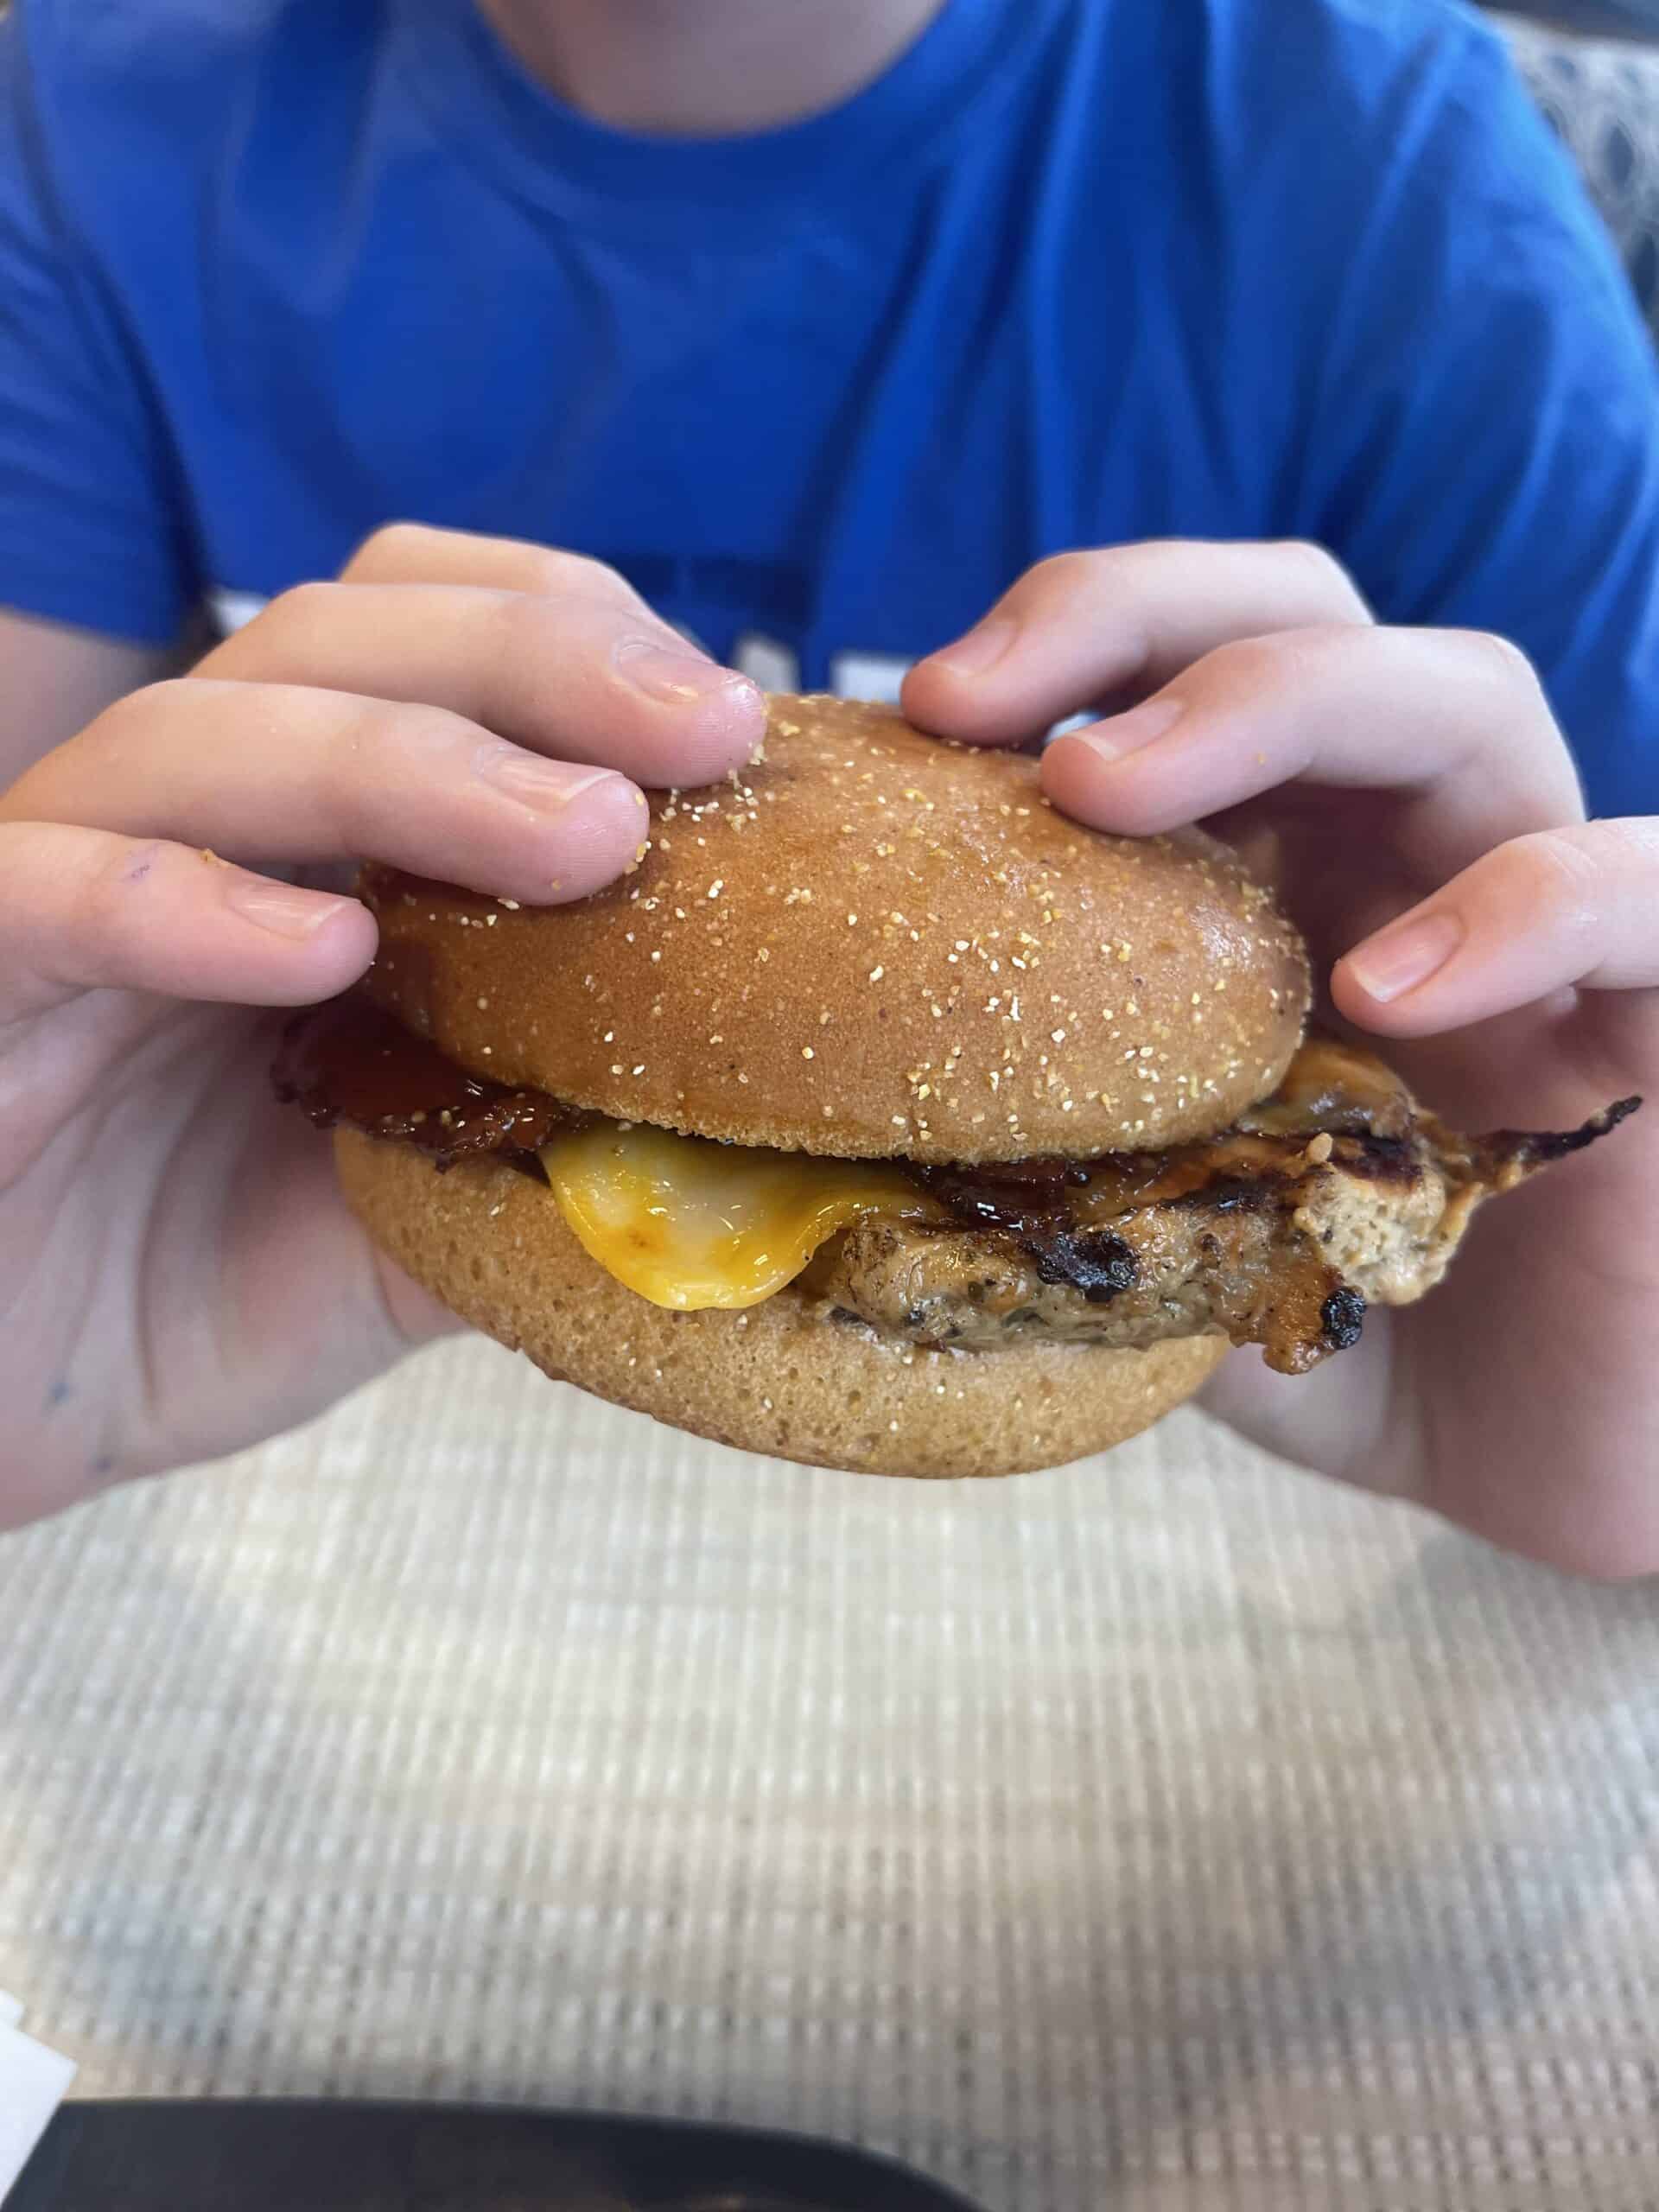 Someone holding a Chick-fil-A grilled chicken sandwich on a gluten-free bun